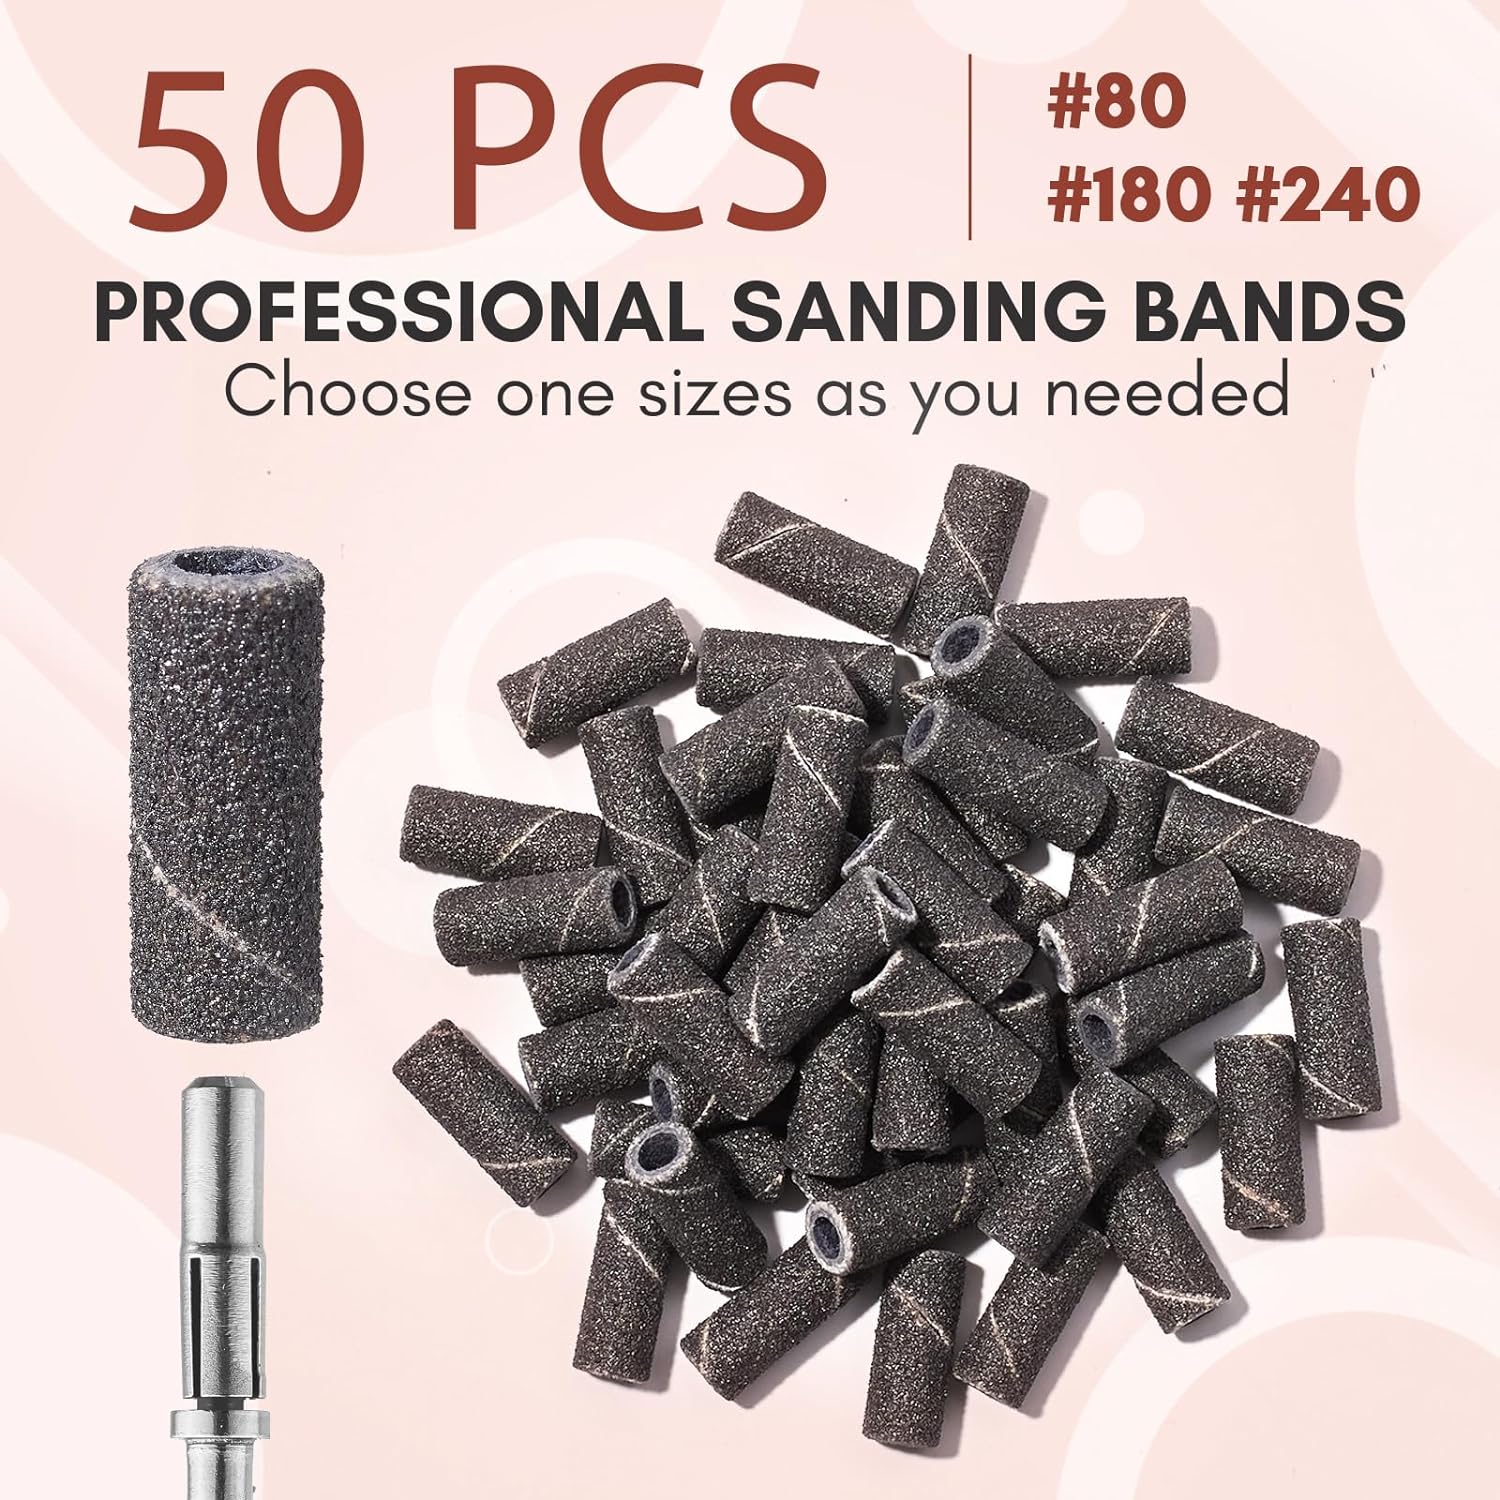 Sanding Bands for Nail Drill with 3.mm Mandrel Bits #240, 50pcs